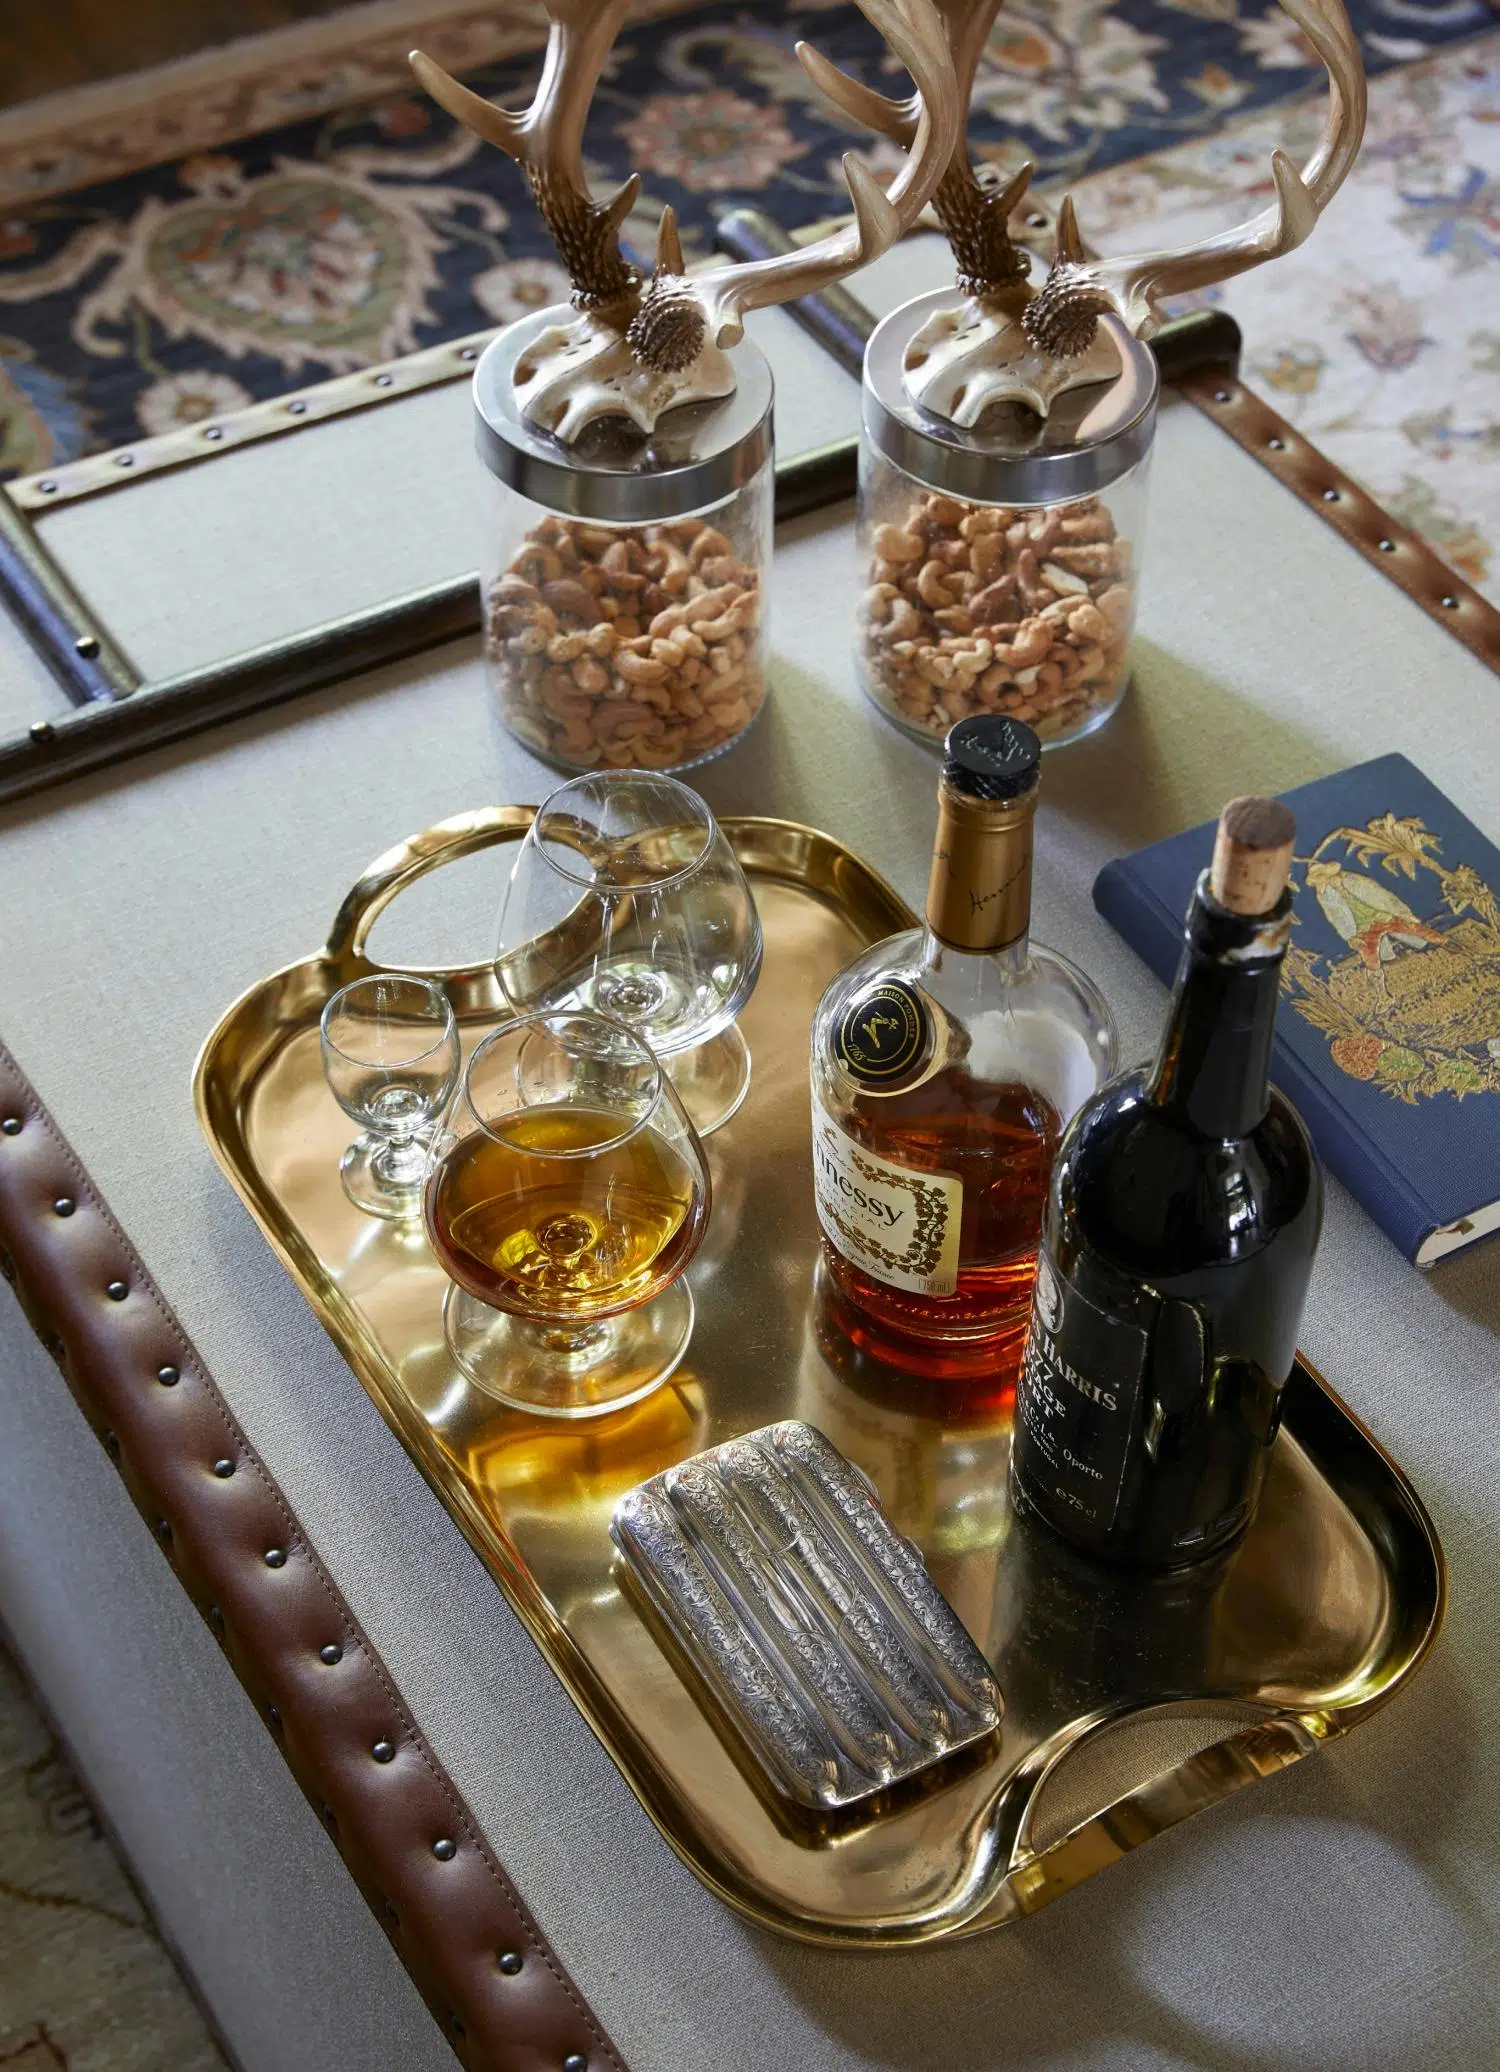 A bottle of Hennessy and a bottle of port sit on a gold tray with some glasses and what appears to be a cigarette box. Two jars contain cashew nuts, and in the background a patterned carpet is visible.